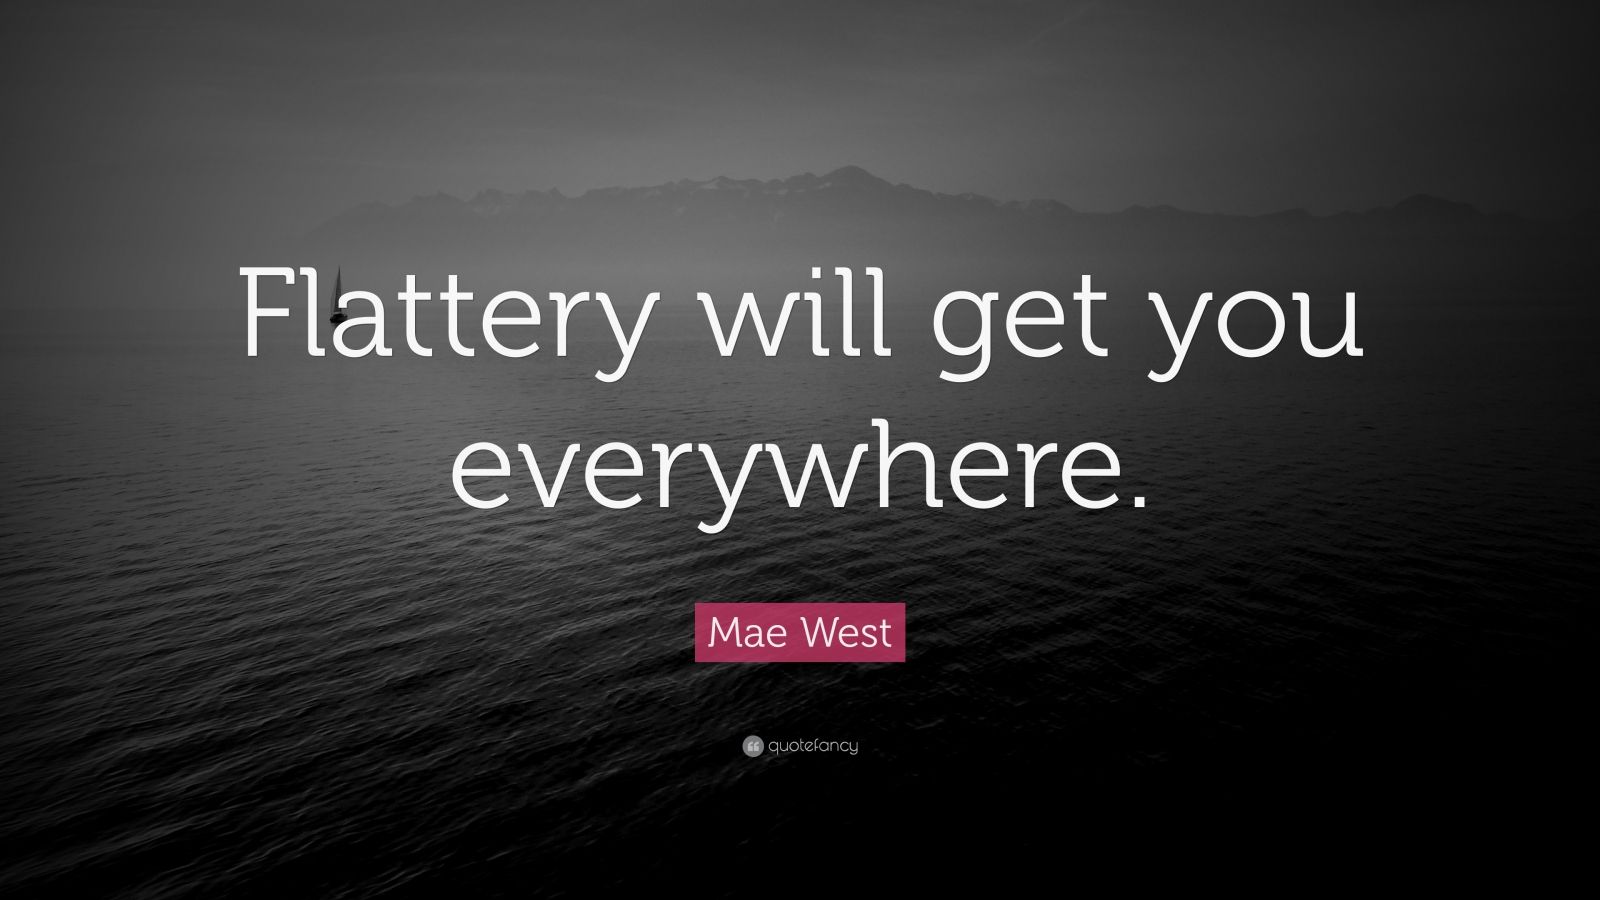 Mae West Quote: "Flattery will get you everywhere." (19 wallpapers) - Quotefancy